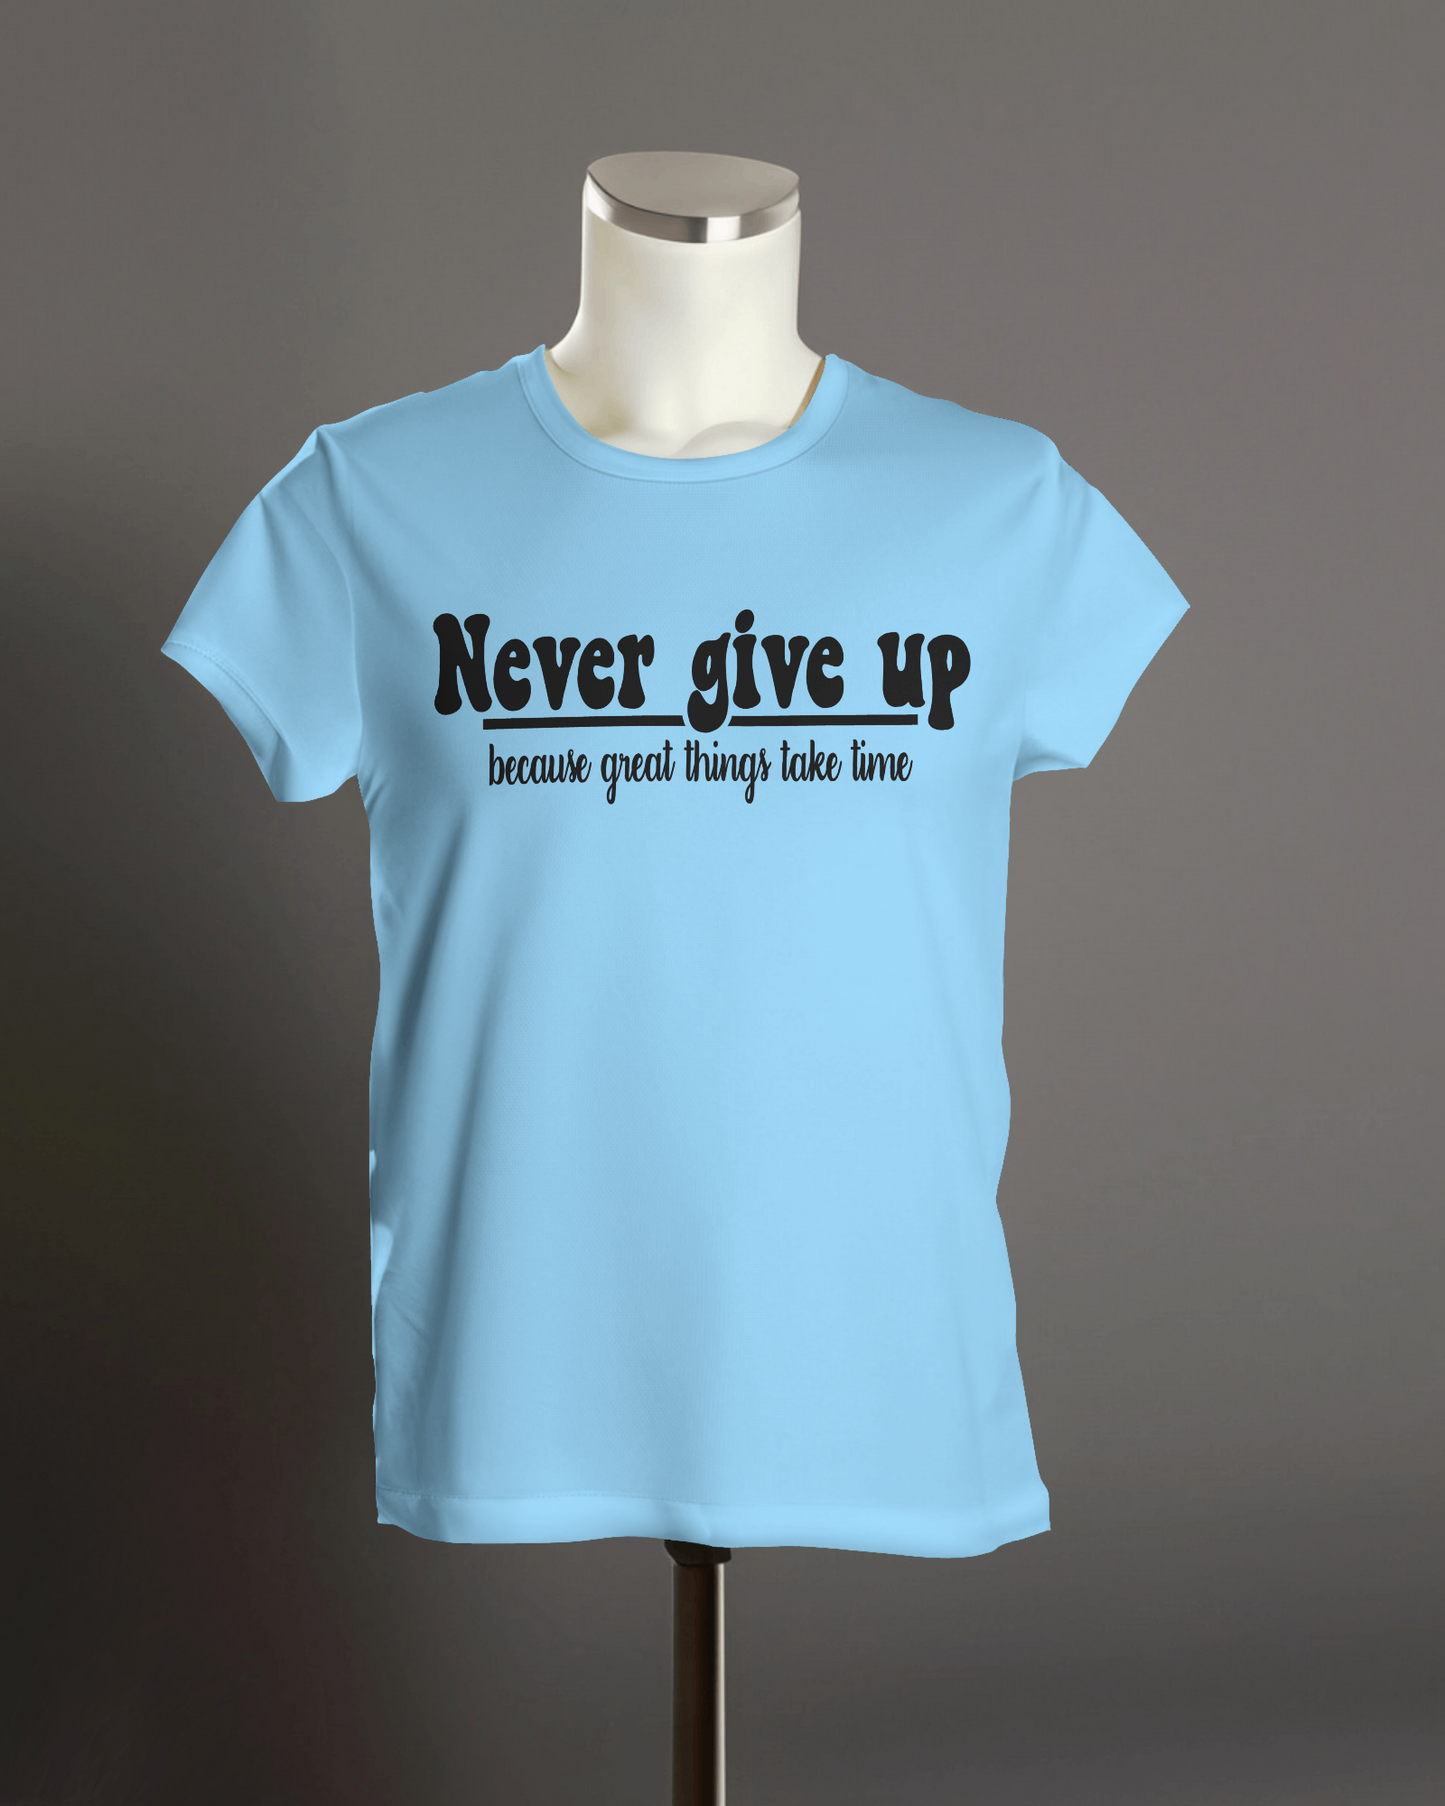 " Never give up because great things take time " T-Shirt.